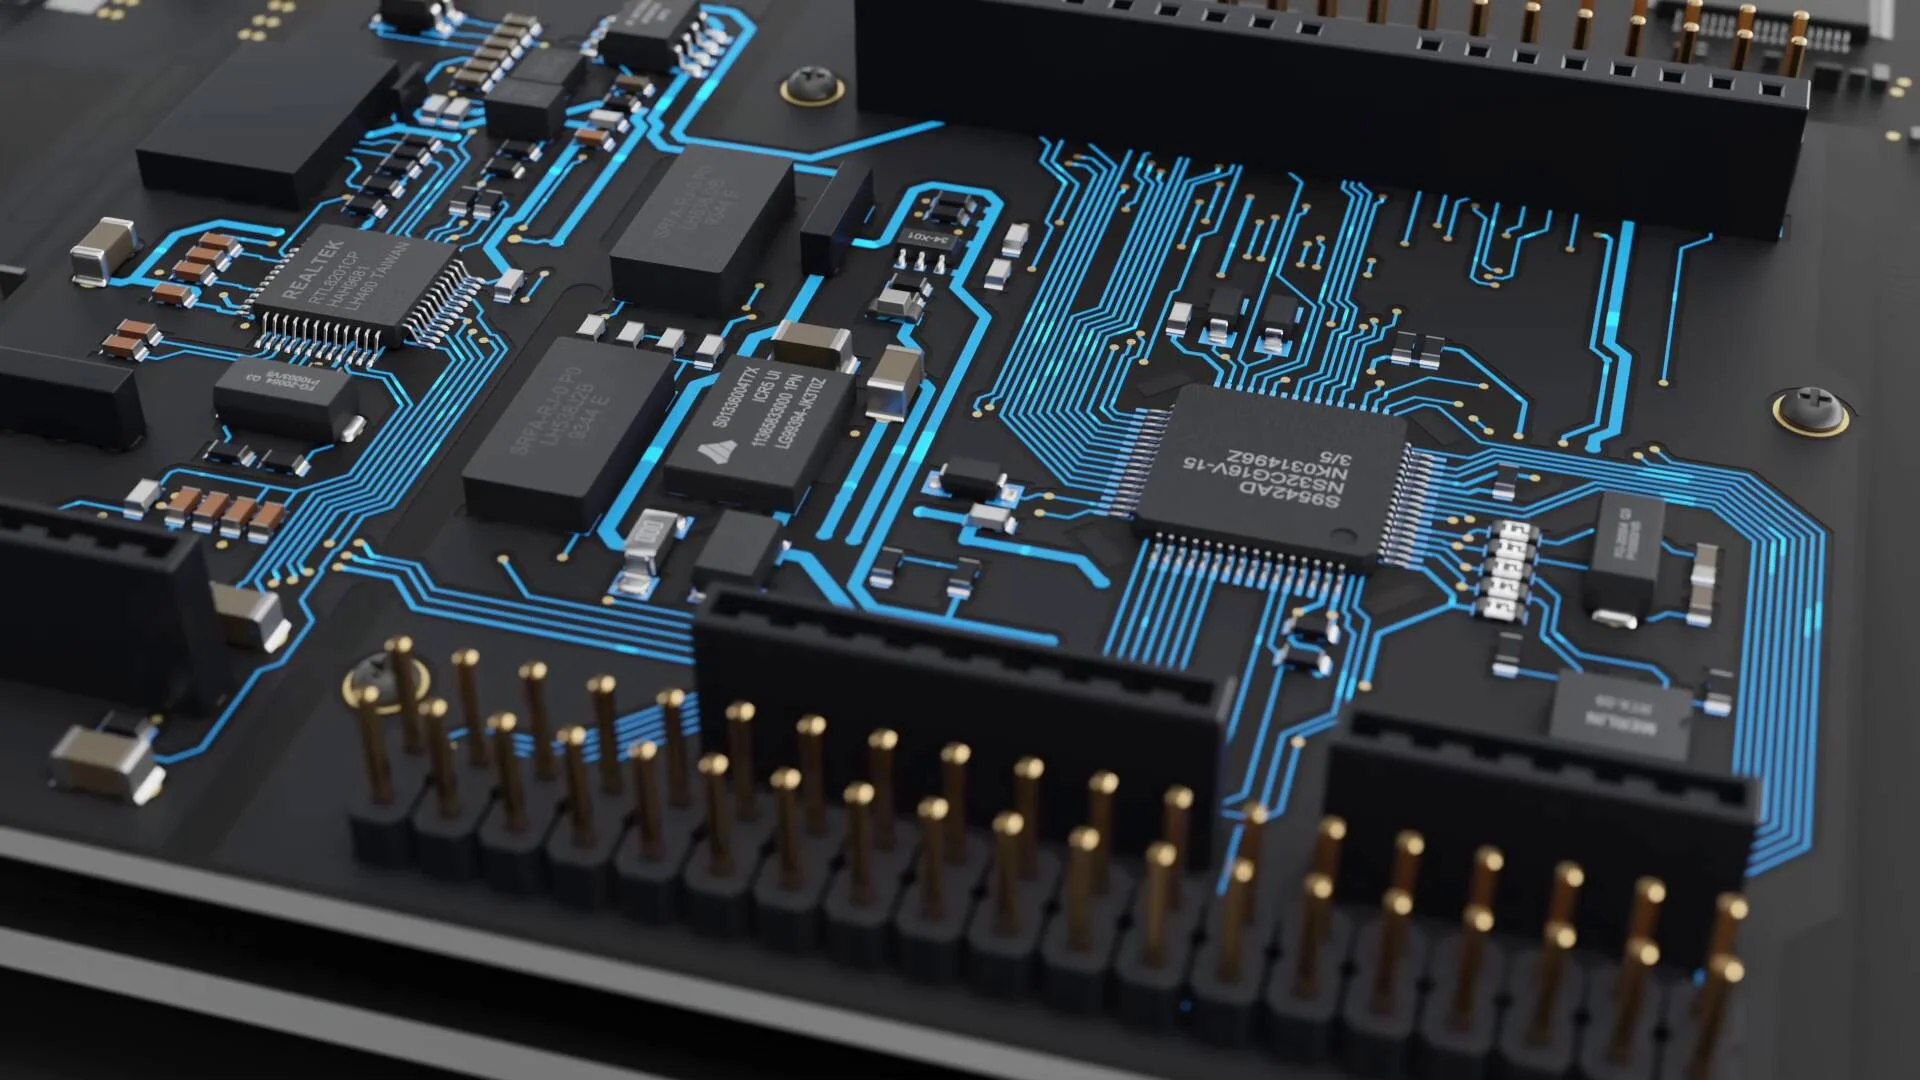 12 Specs to Consider When Choosing a Microcontroller for Your Product   Make